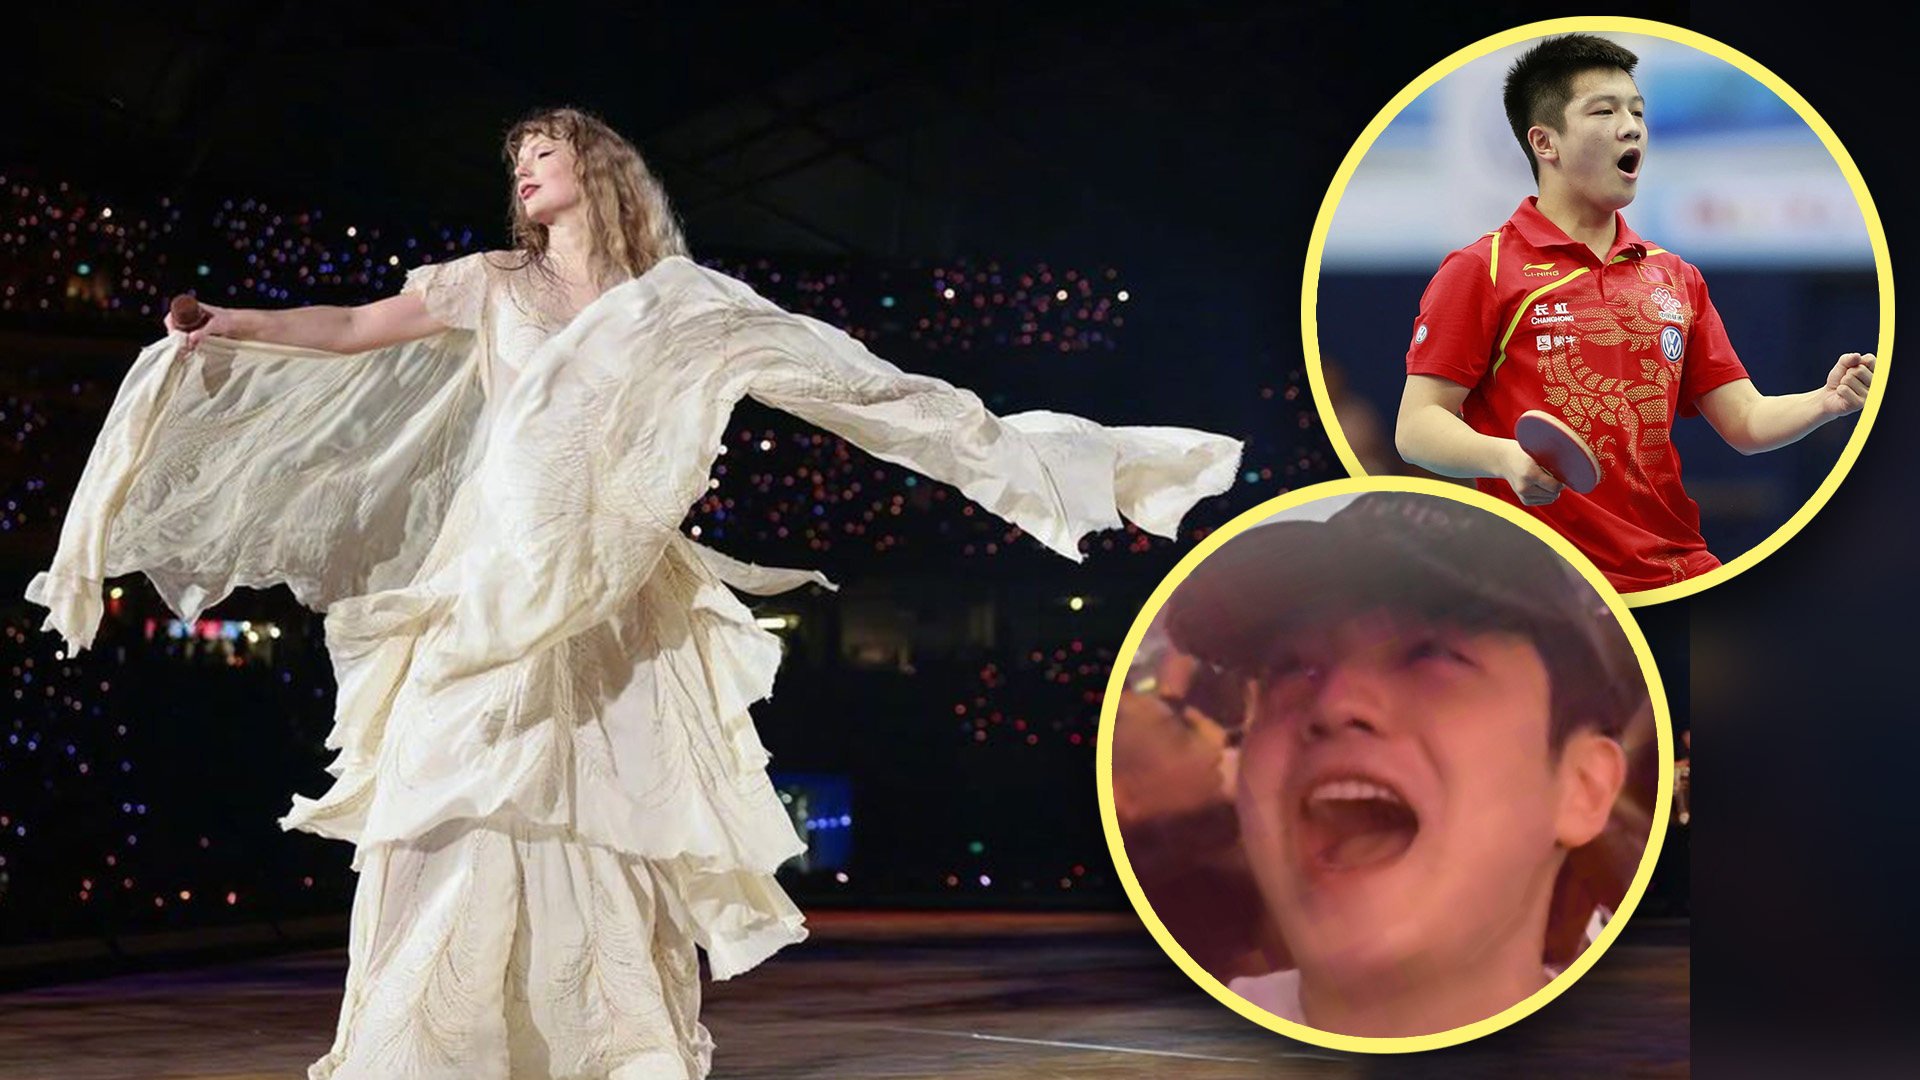 A top table tennis player in China has faced online criticism for “slacking” after he went to a Taylor Swift concert in Singapore before taking part in and crashing out of a major tournament in the Lion City. Photo: SCMP composite/Weibo/Baidu/Douyin